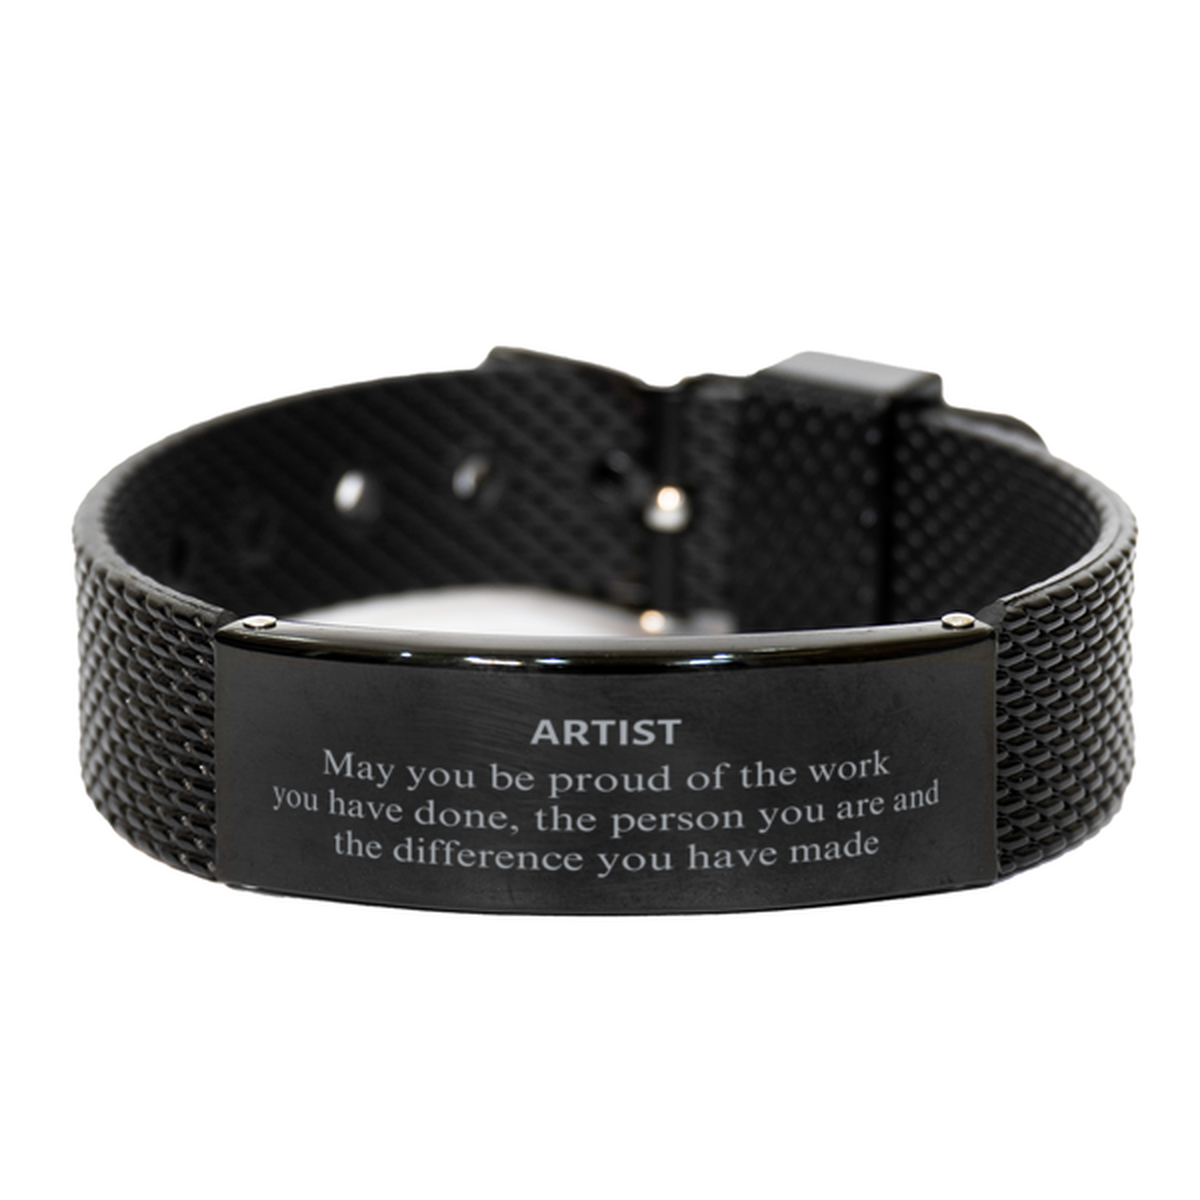 Artist May you be proud of the work you have done, Retirement Artist Black Shark Mesh Bracelet for Colleague Appreciation Gifts Amazing for Artist